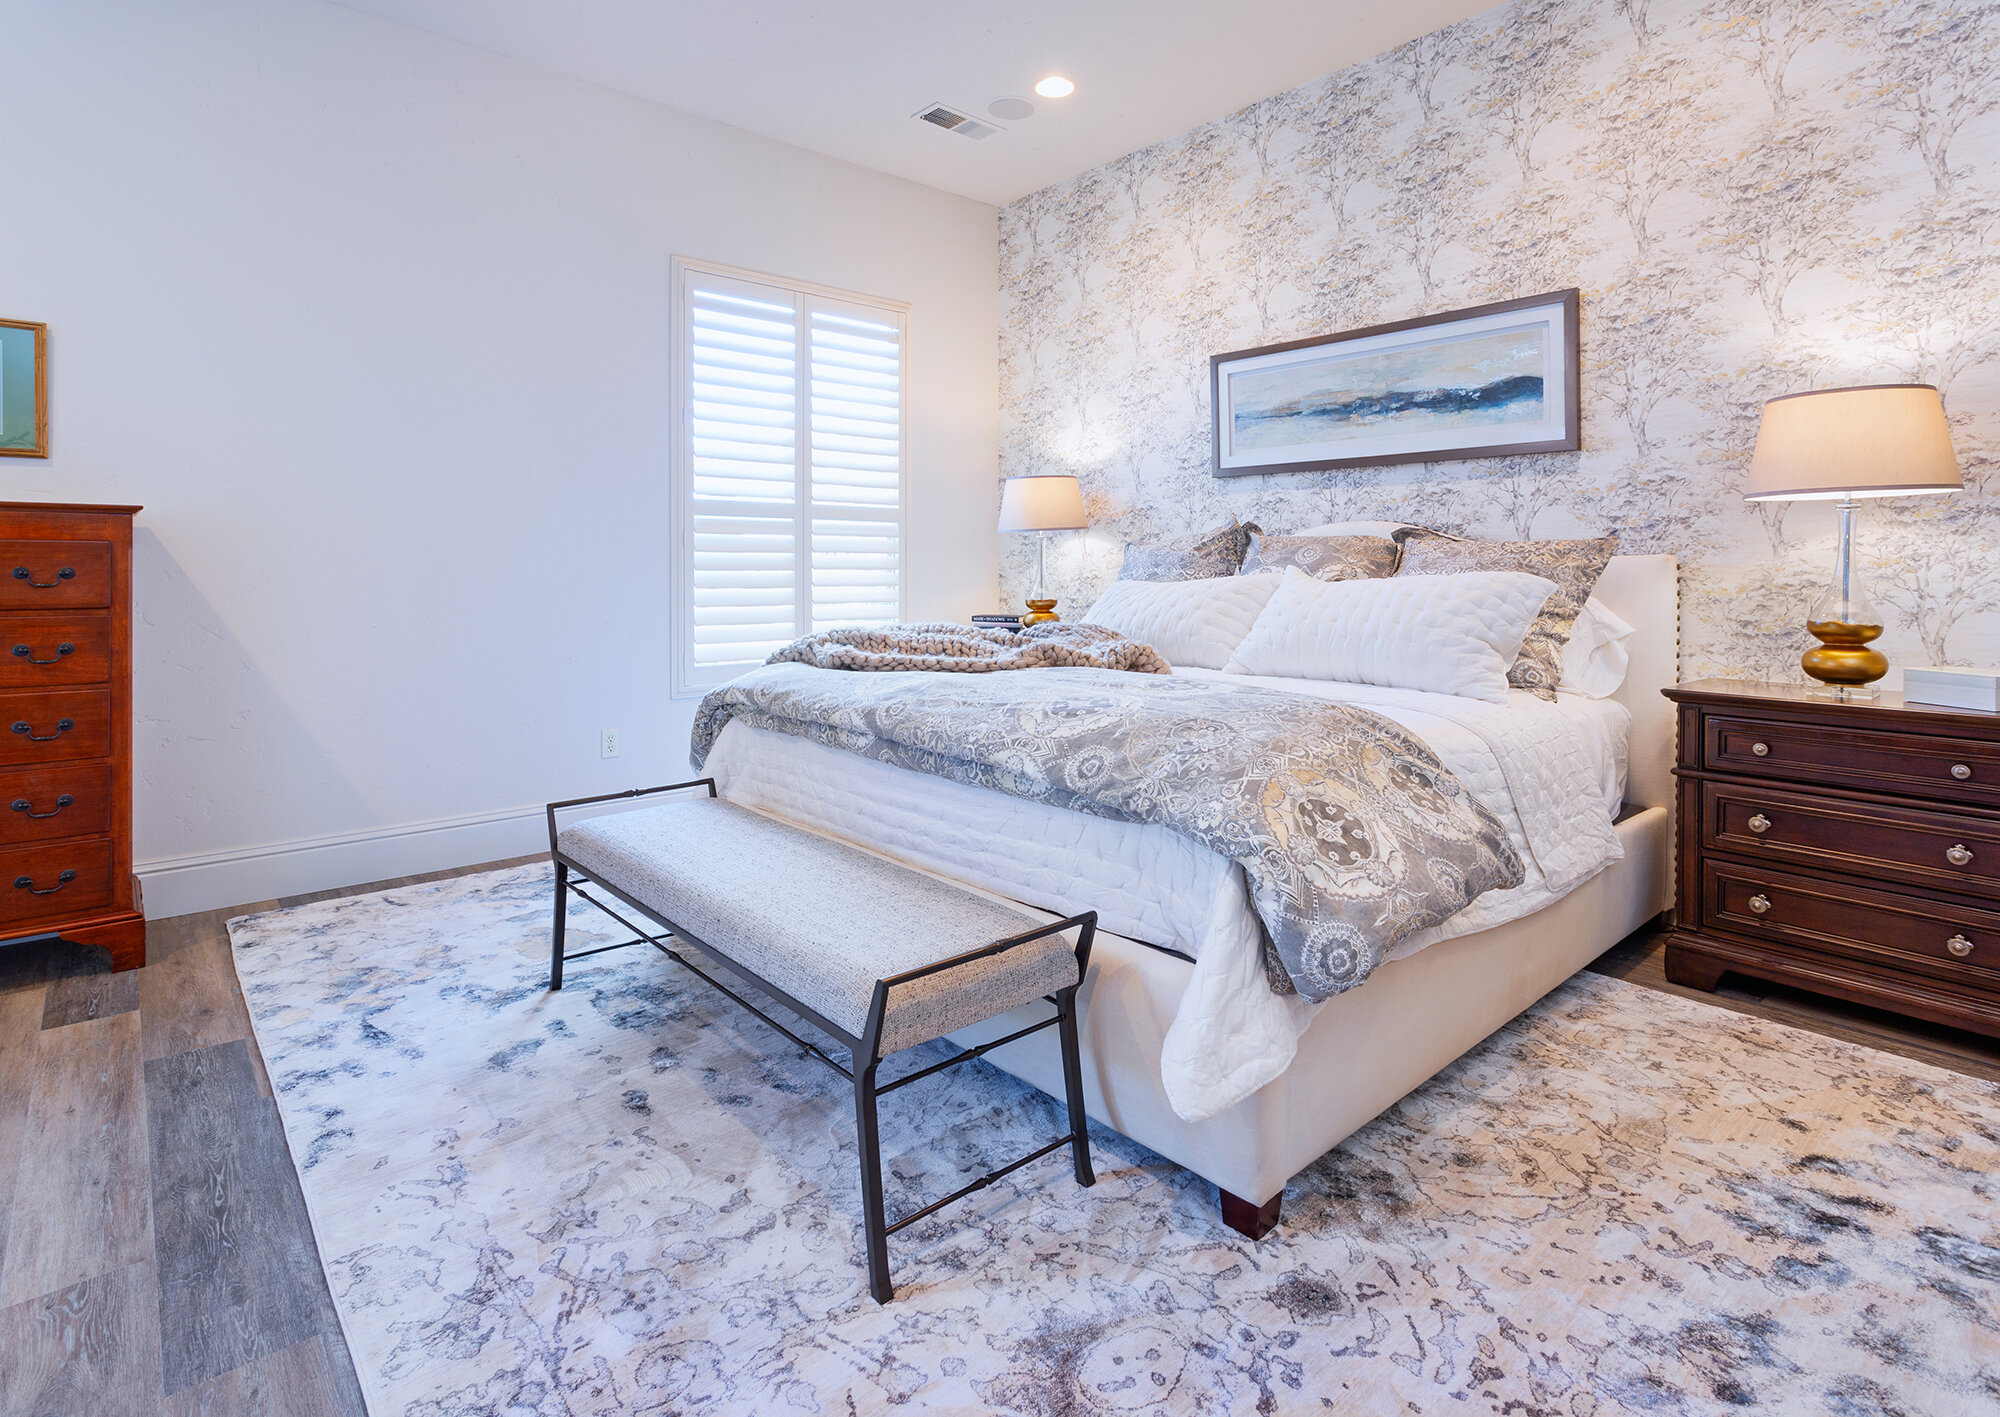 We completed this master suite design last year. The monocromatic color palette is soothing.